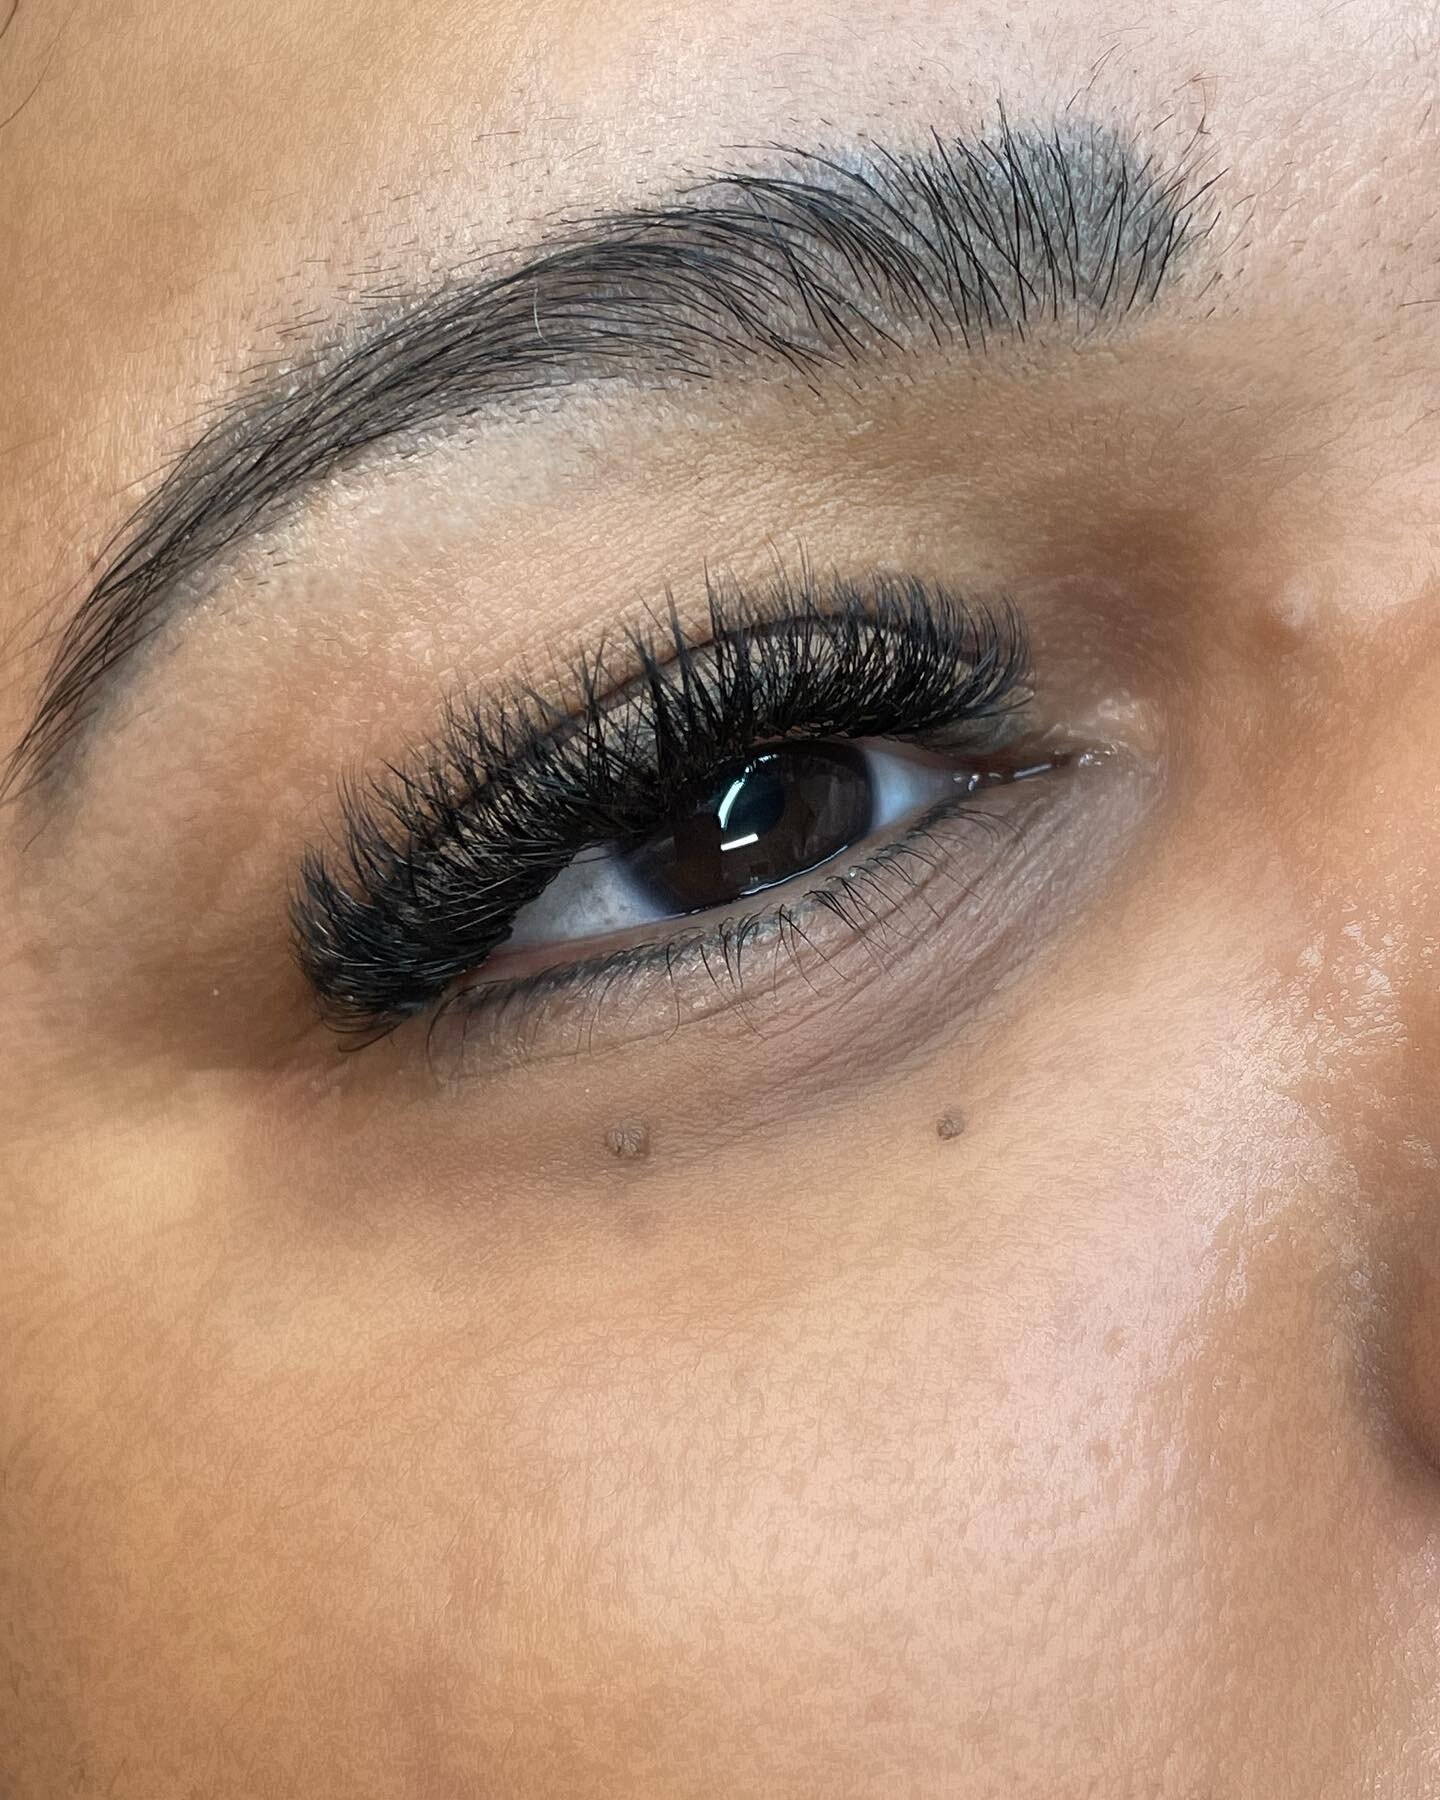 Professionally trained, quality products and great retention make getting lash extensions rewarding and easy!  Book online at highbrowmakeovers.com